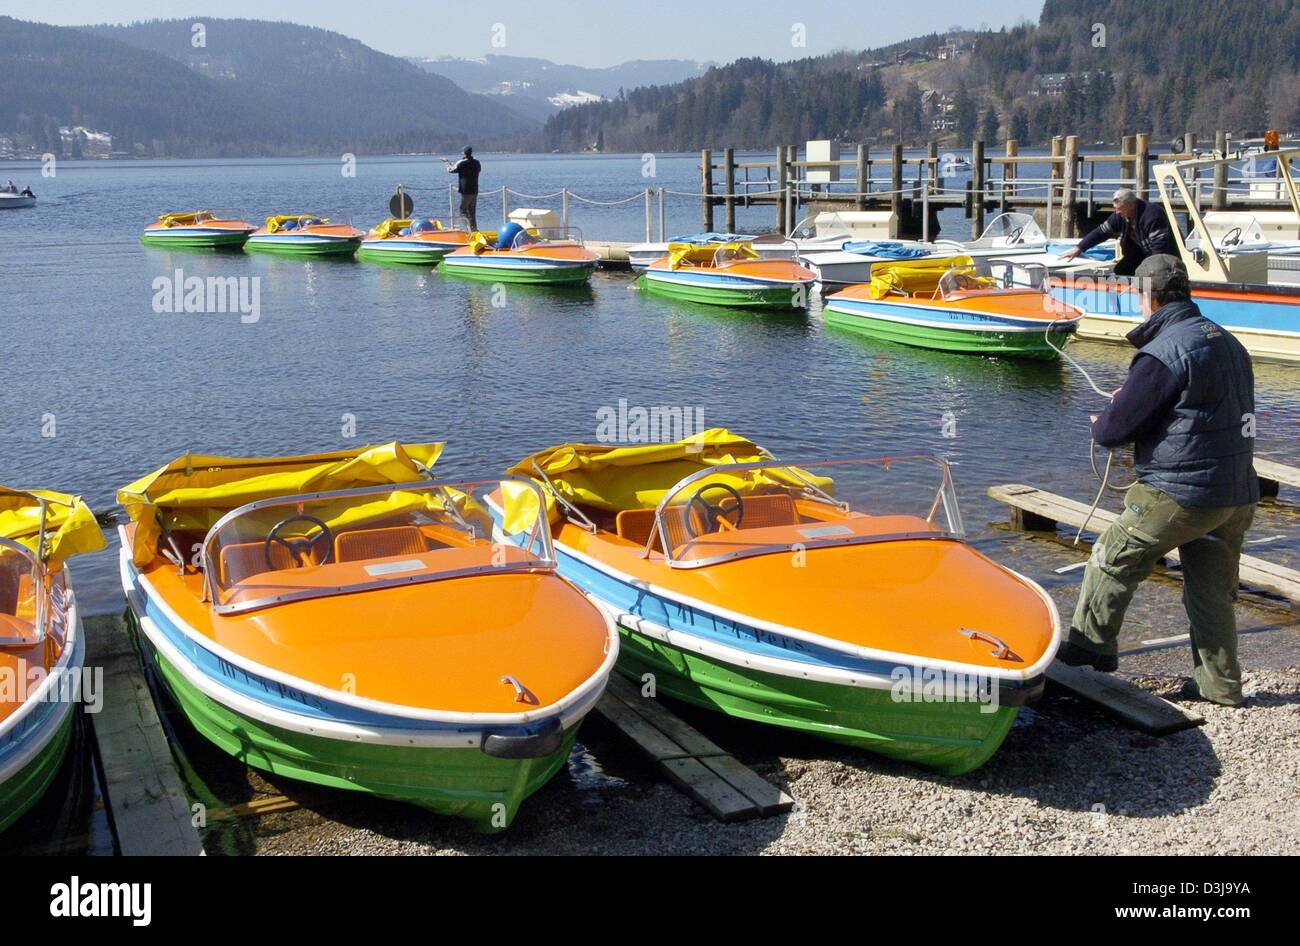 (dpa) - Employees of a boat rental prepare the pedal boats for the summer season on Lake Titi in the Black Forest, in Titisee, Germany, 30 March 2004. With warm temperatures and the Easter holidays approaching, the tourism branch hopes for a good start into the summer season. Stock Photo